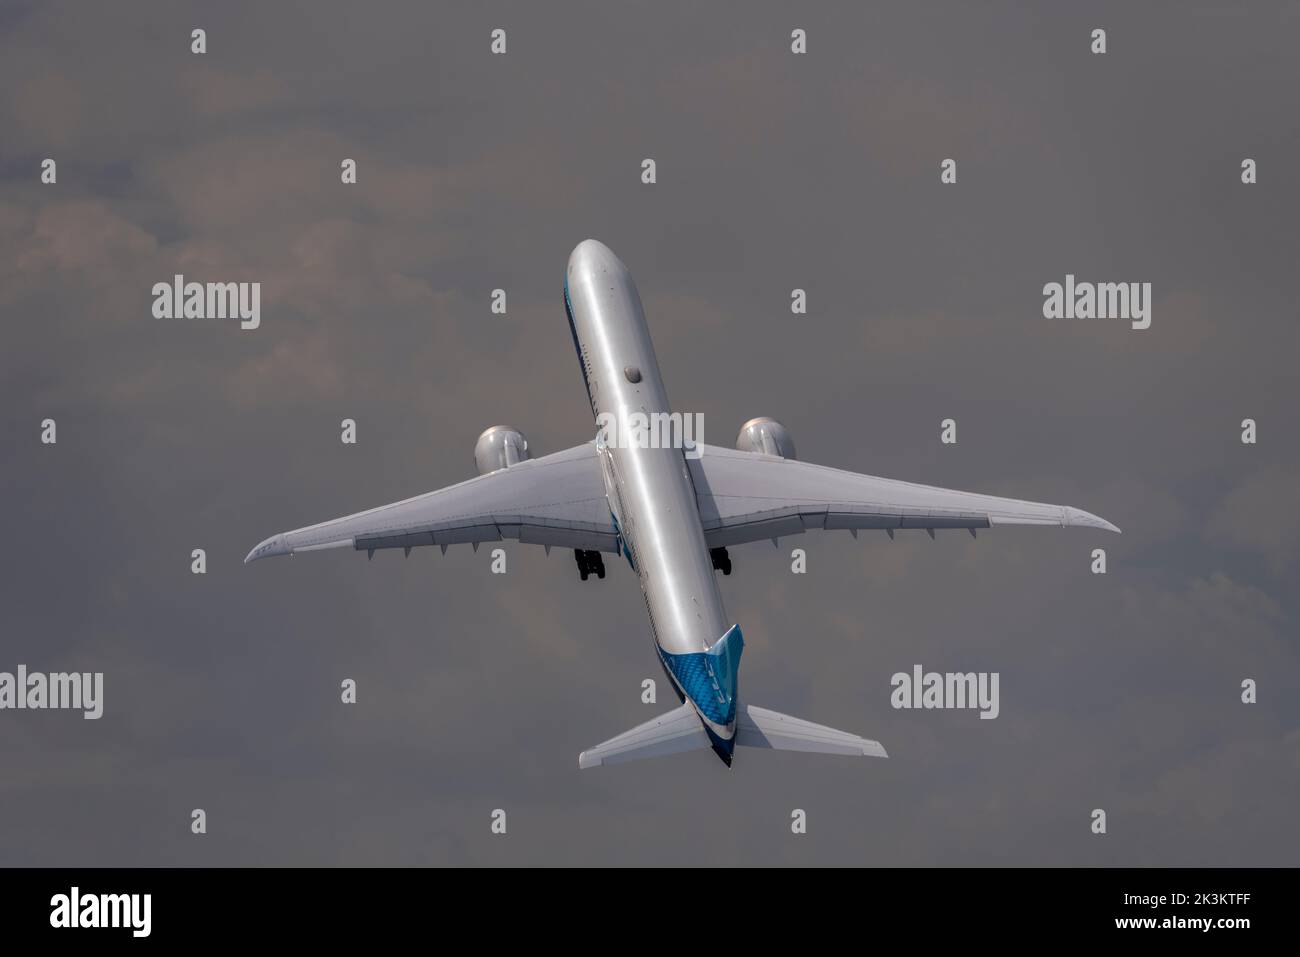 Boeing 777-9, also known as 777X, airliner jet plane at Farnborough International Airshow 2022, steep climb after take off into darkening sky Stock Photo